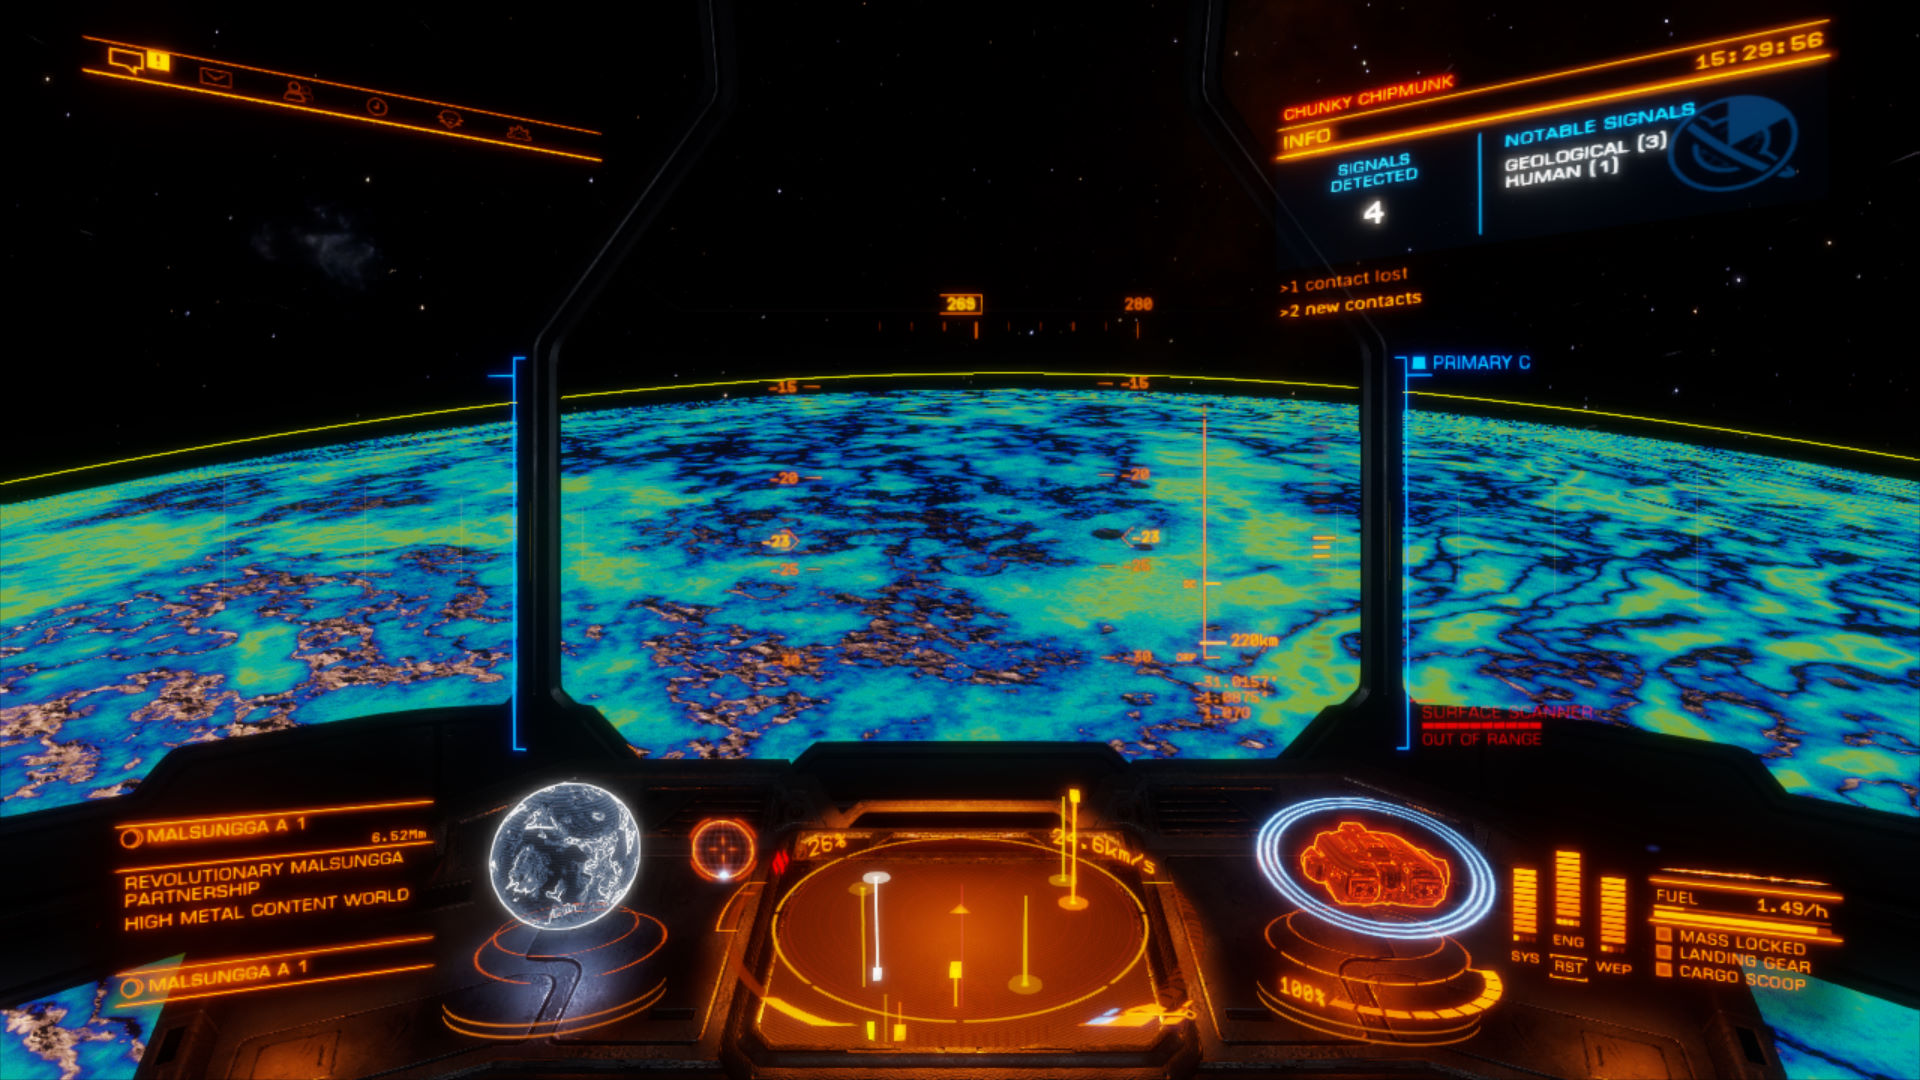 Elite Dangerous Gameplay Footage and Impressions